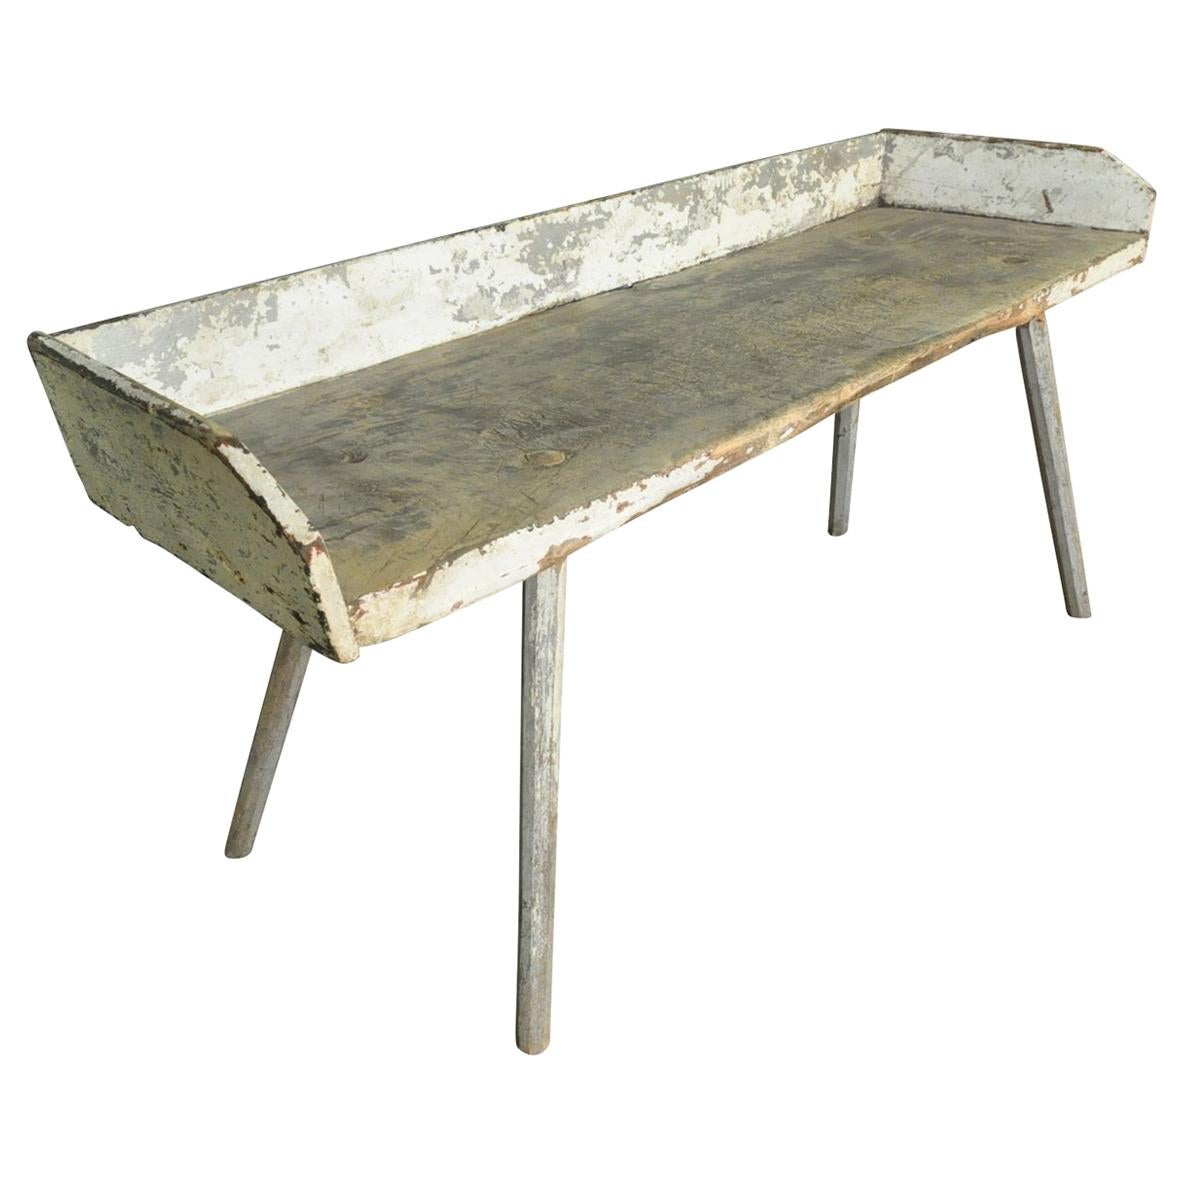 French Early 19th Century Primitive Work Table